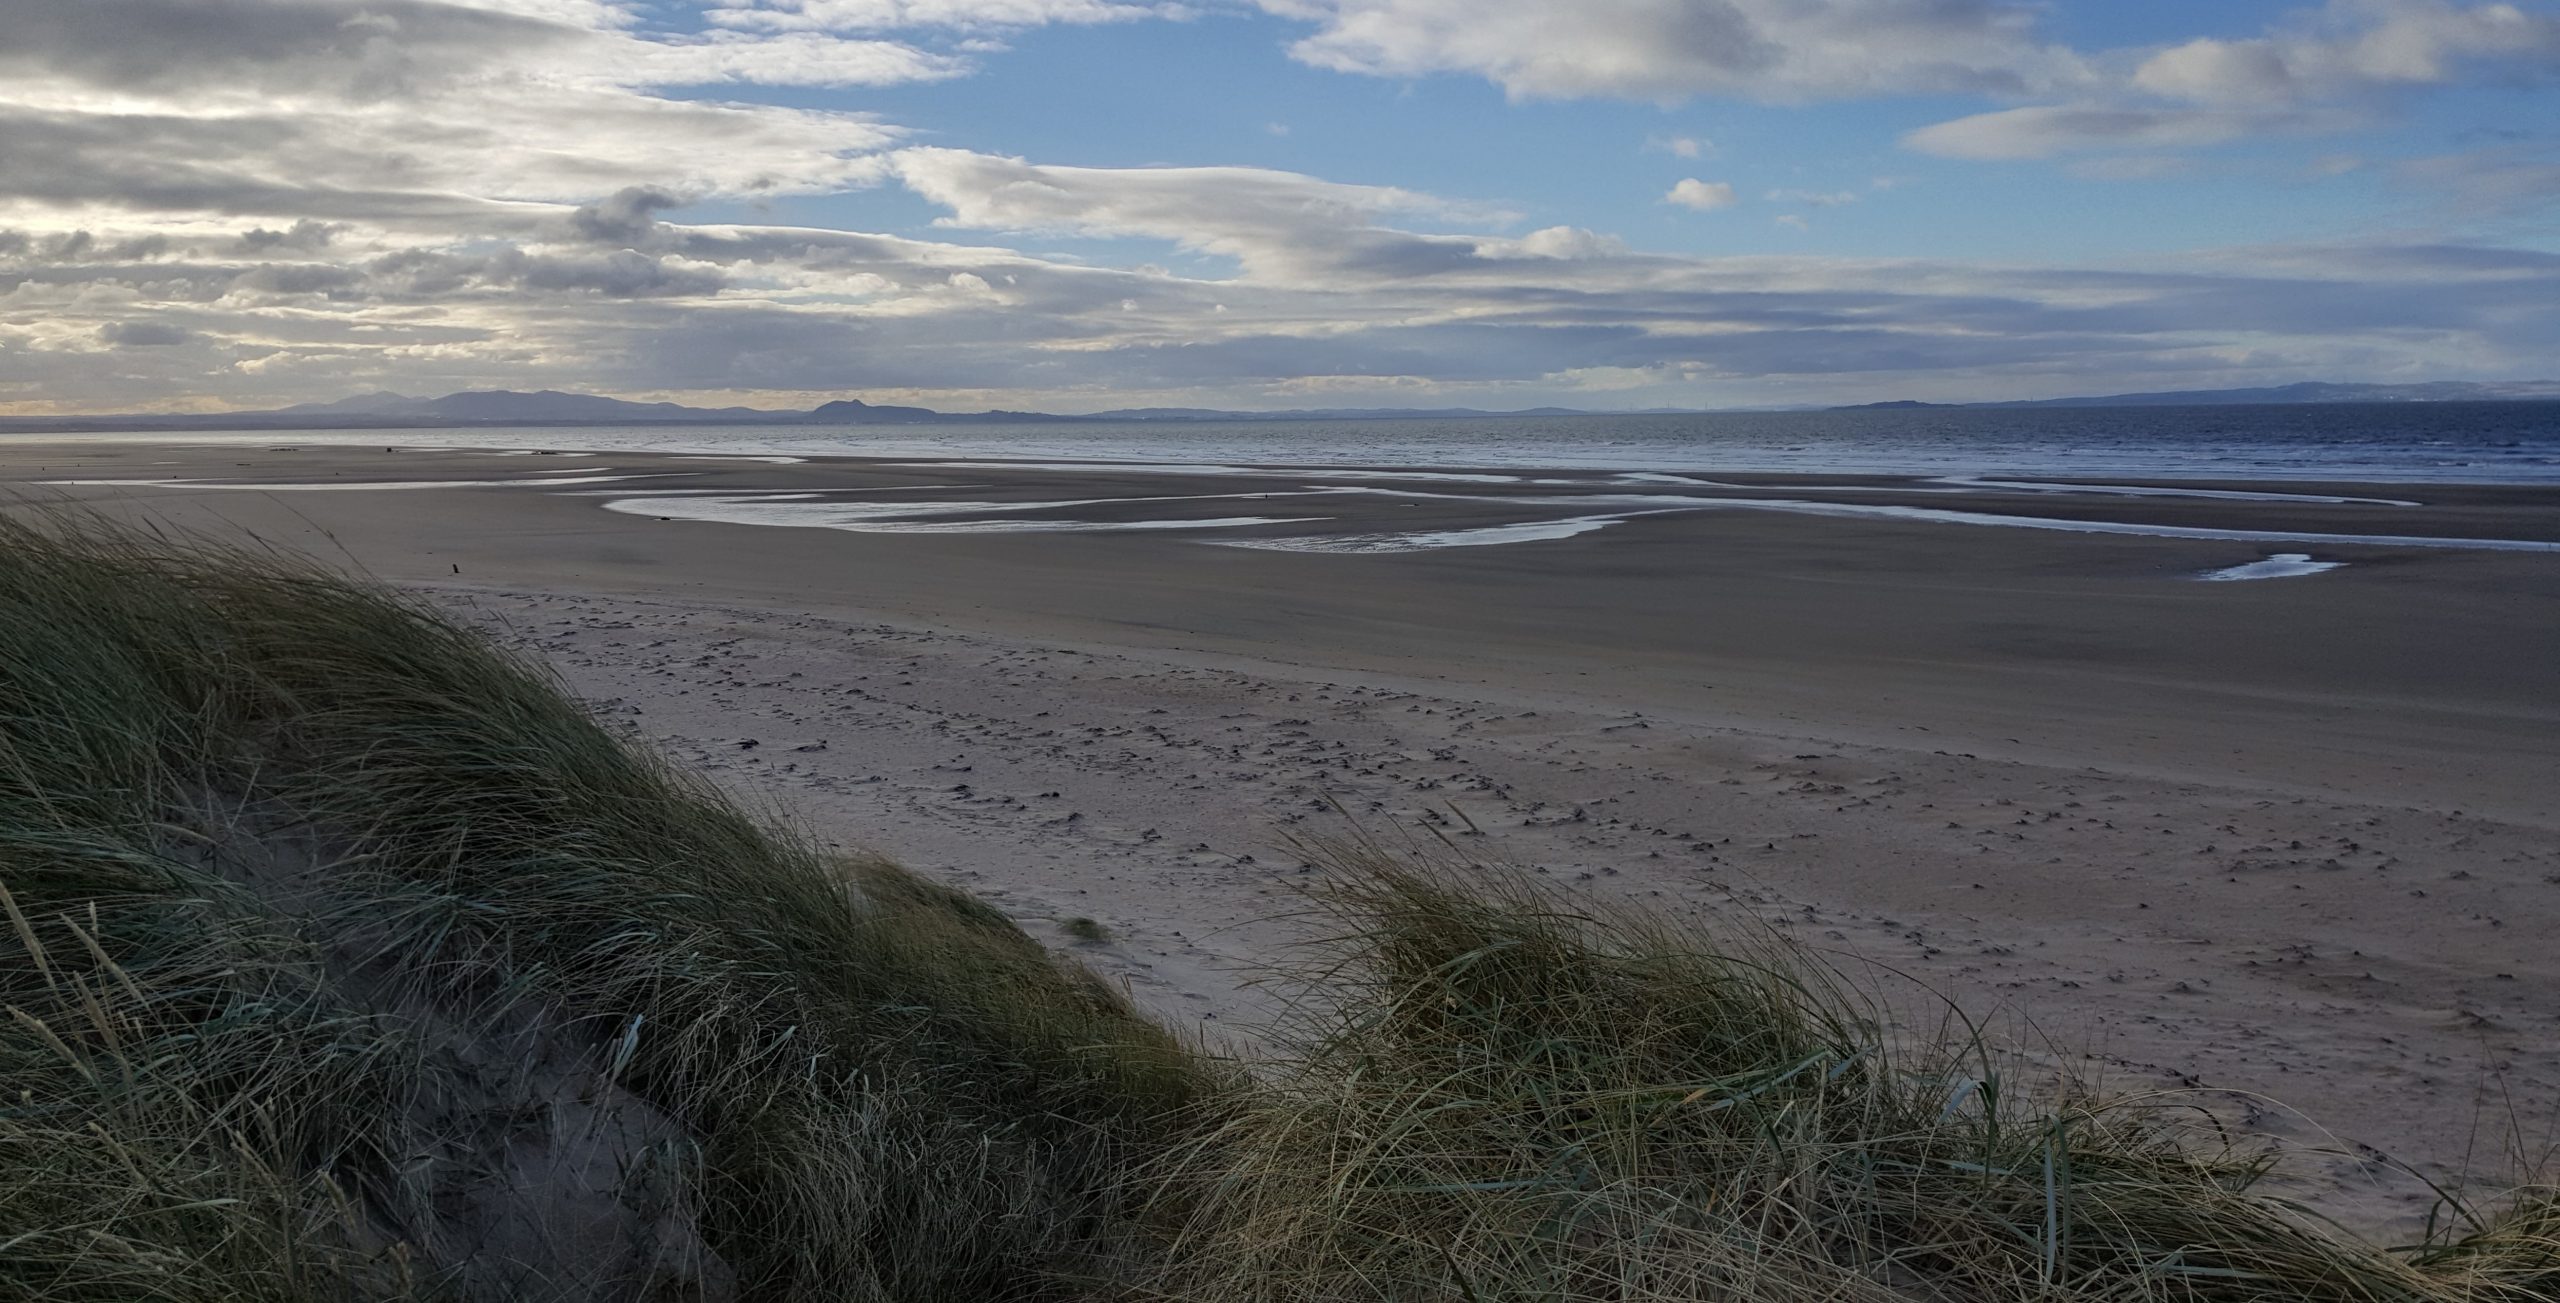 VISIT TO ABERLADY BAY, A HAVEN FOR BIRDS AND A COASTAL GEM